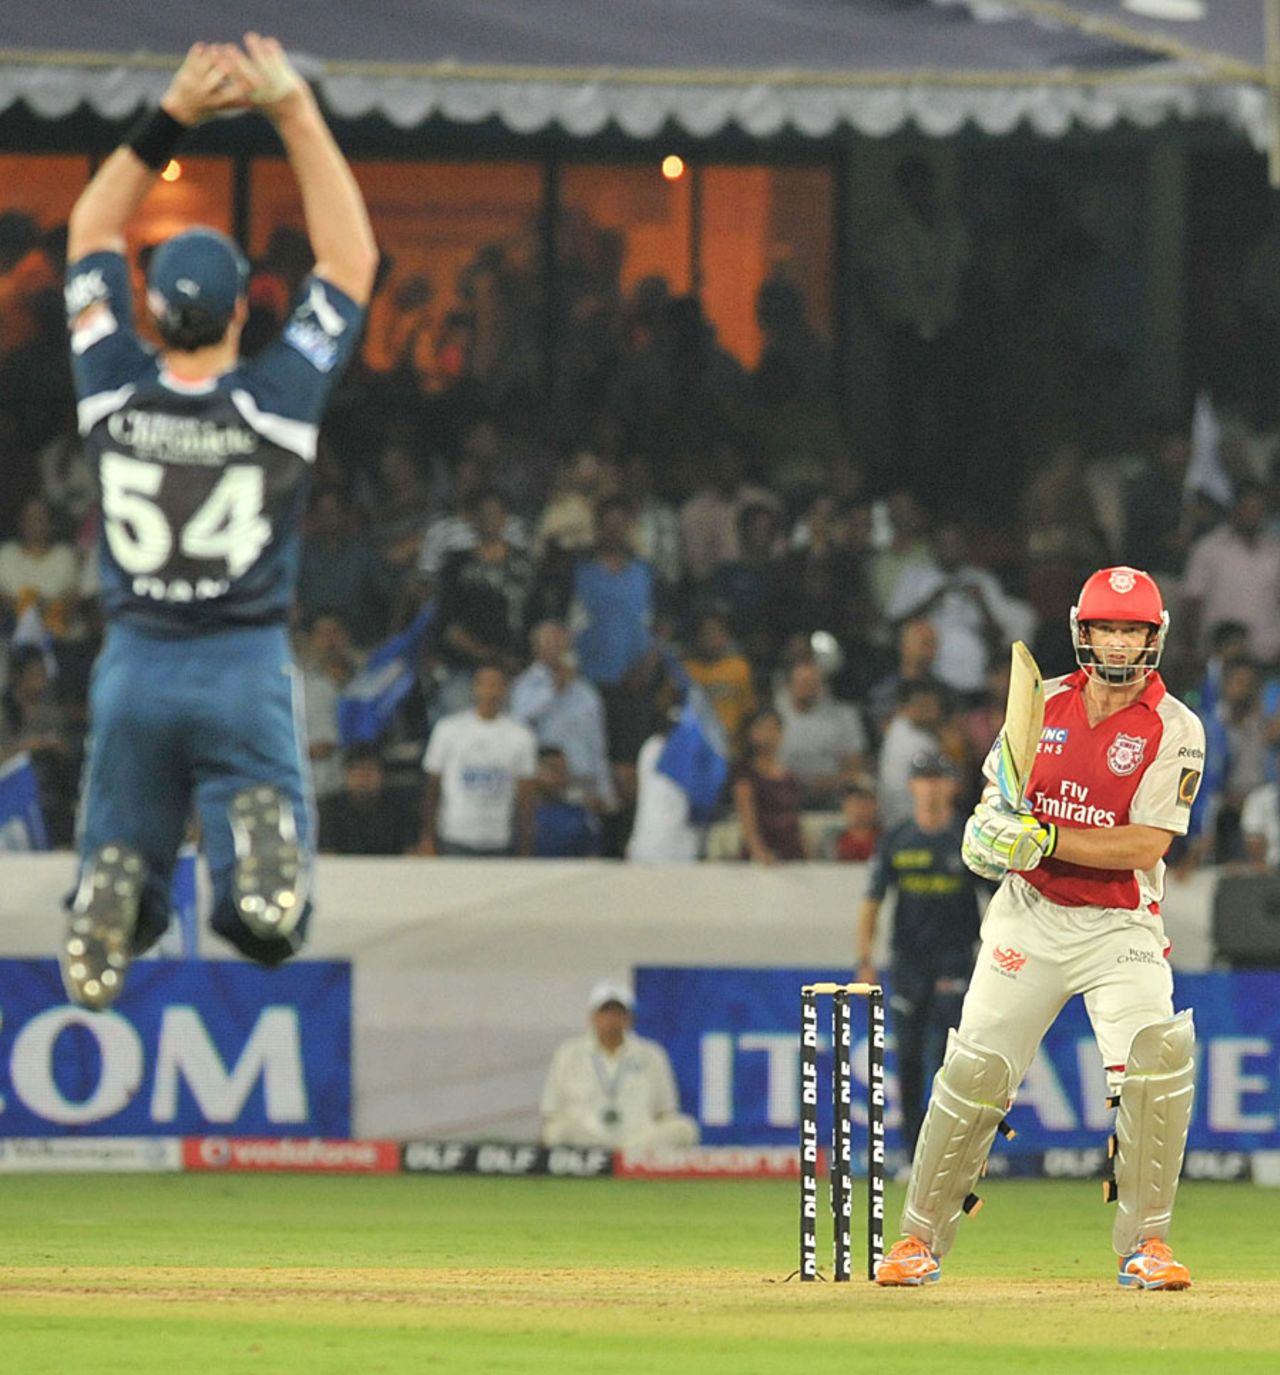 Adam Gilchrist clears the in-field during his 30-ball fifty, Deccan Chargers v Kings XI Punjab, April 16, 2011